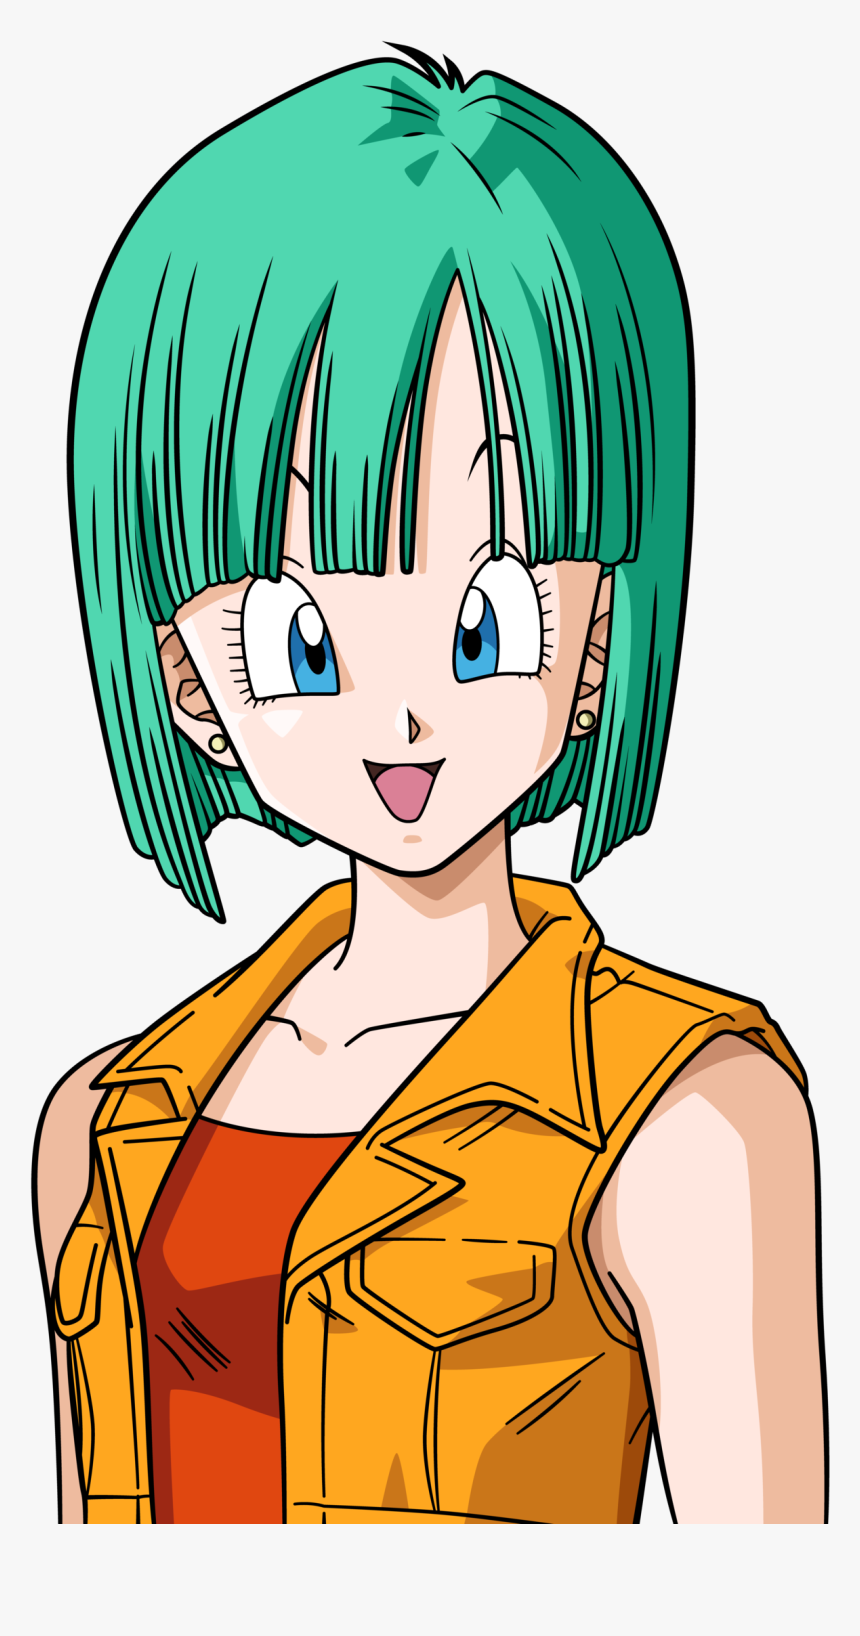 alfredo san juan recommends pictures of bulma from dragon ball z pic